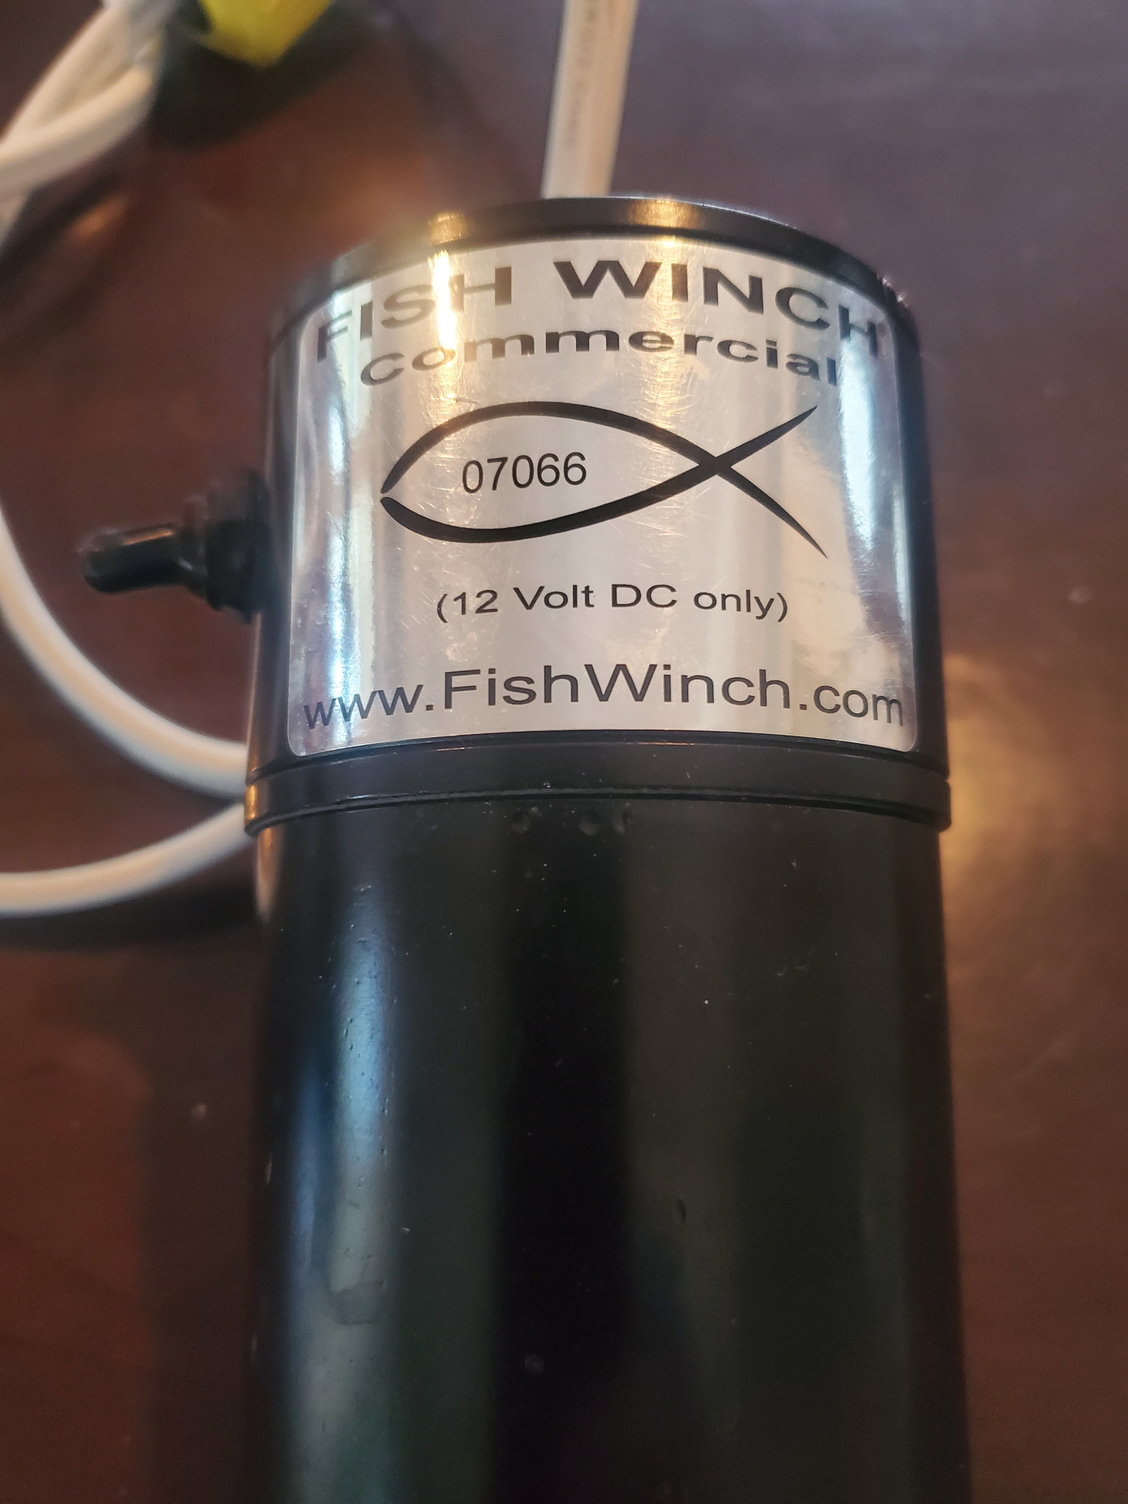 Commercial Electric Fish Winch For Sale / Price Reduced - The Hull Truth -  Boating and Fishing Forum